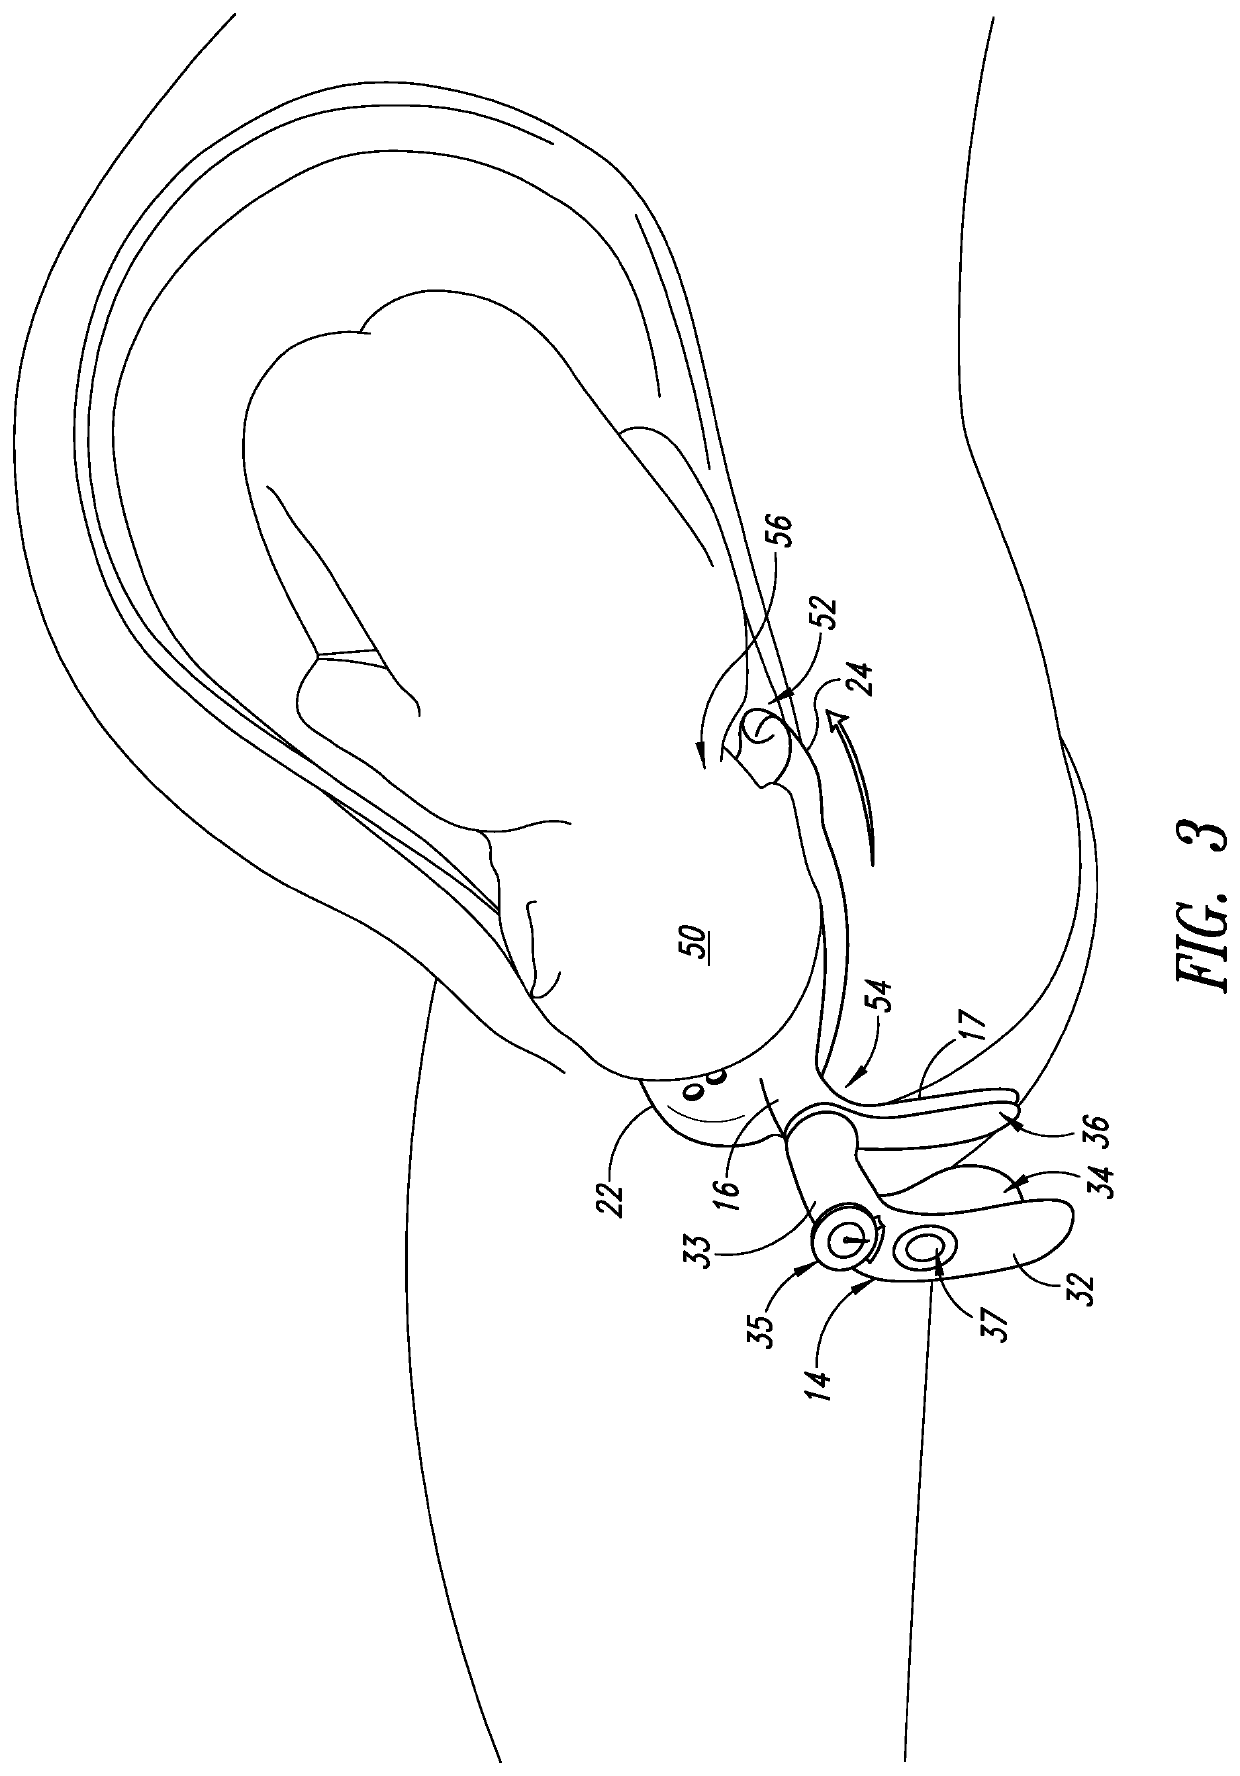 Method of protecting the pelvic floor during vaginal childbirth